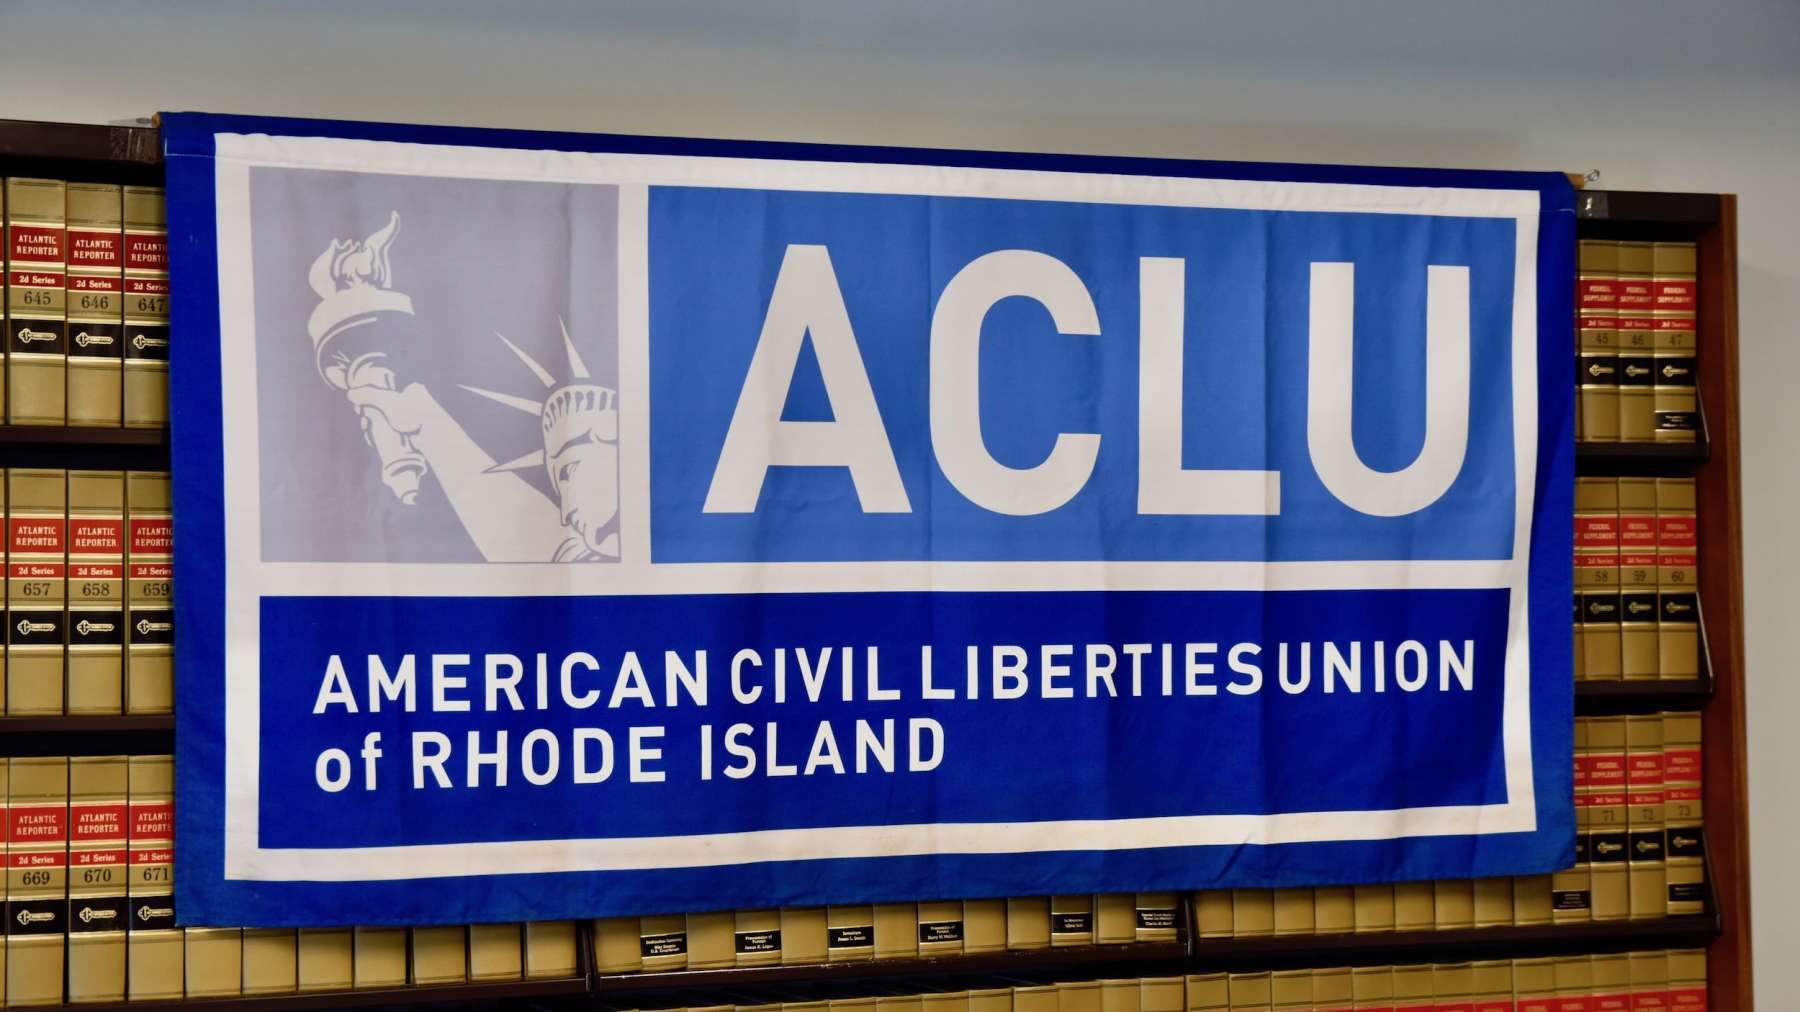 Rhode Island News: ACLU urges public bodies to abide by new standards of government transparency